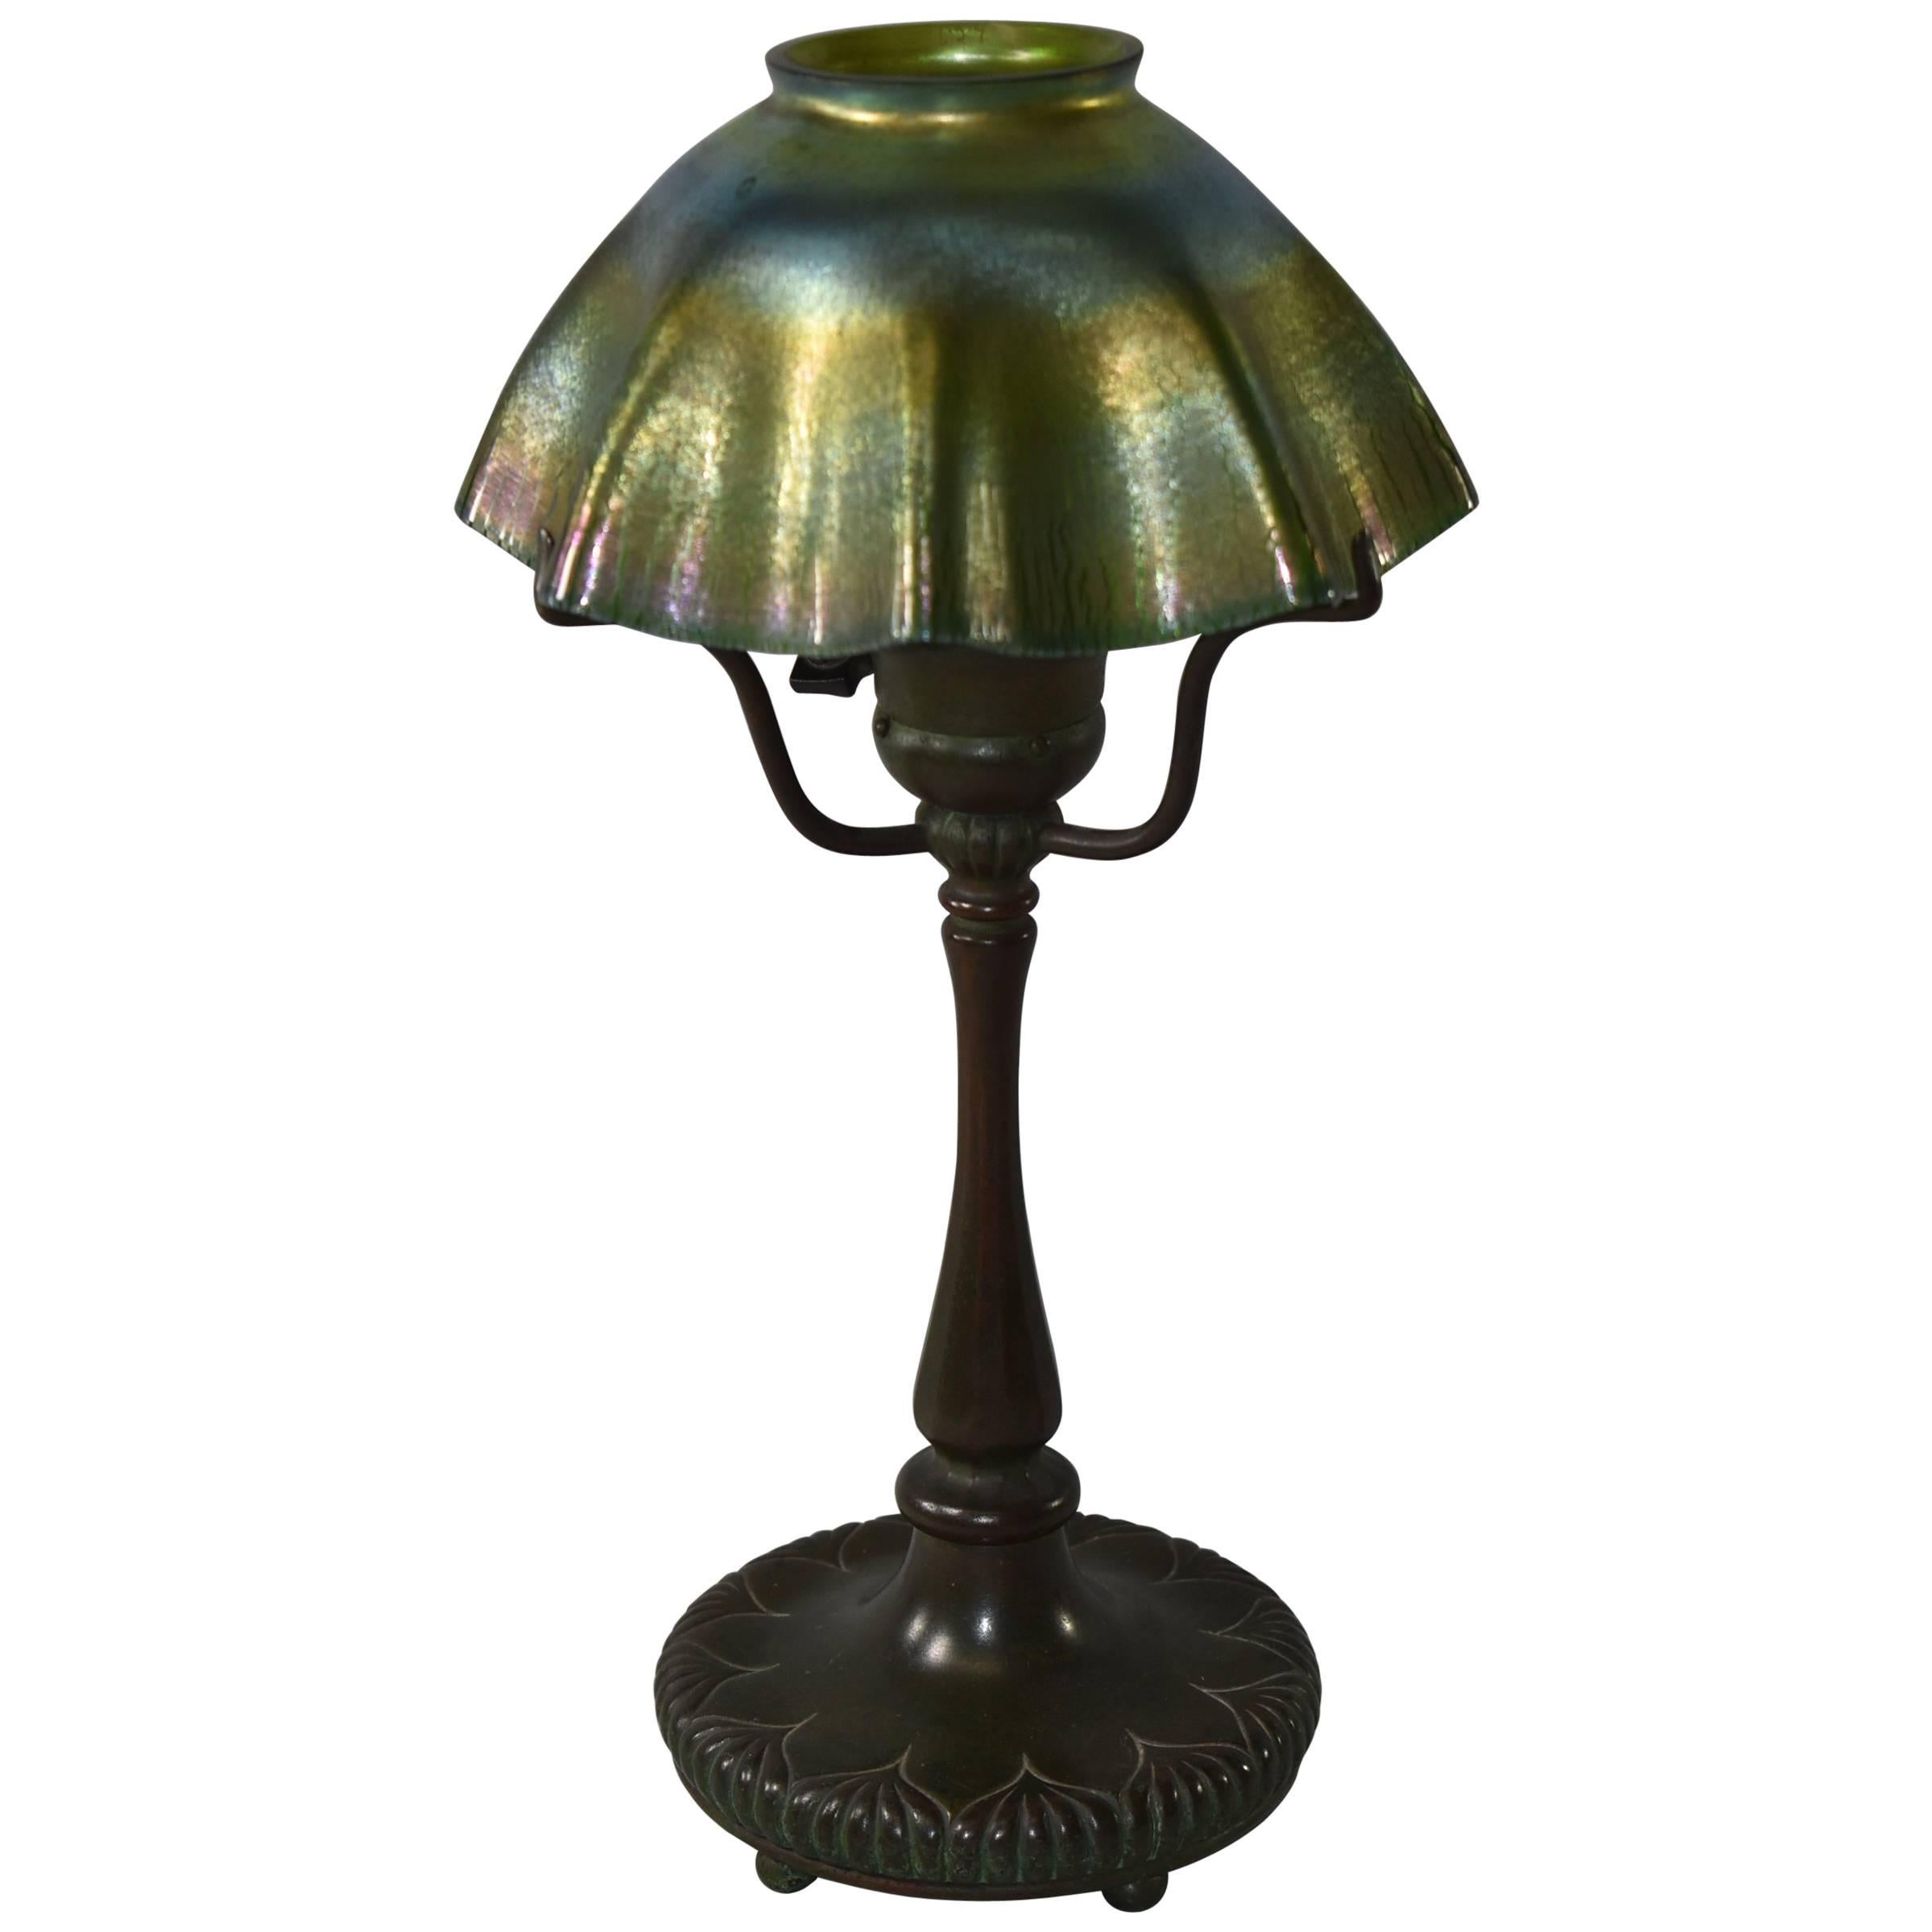 Signed Tiffany LCT Favrile Glass Table Lamp